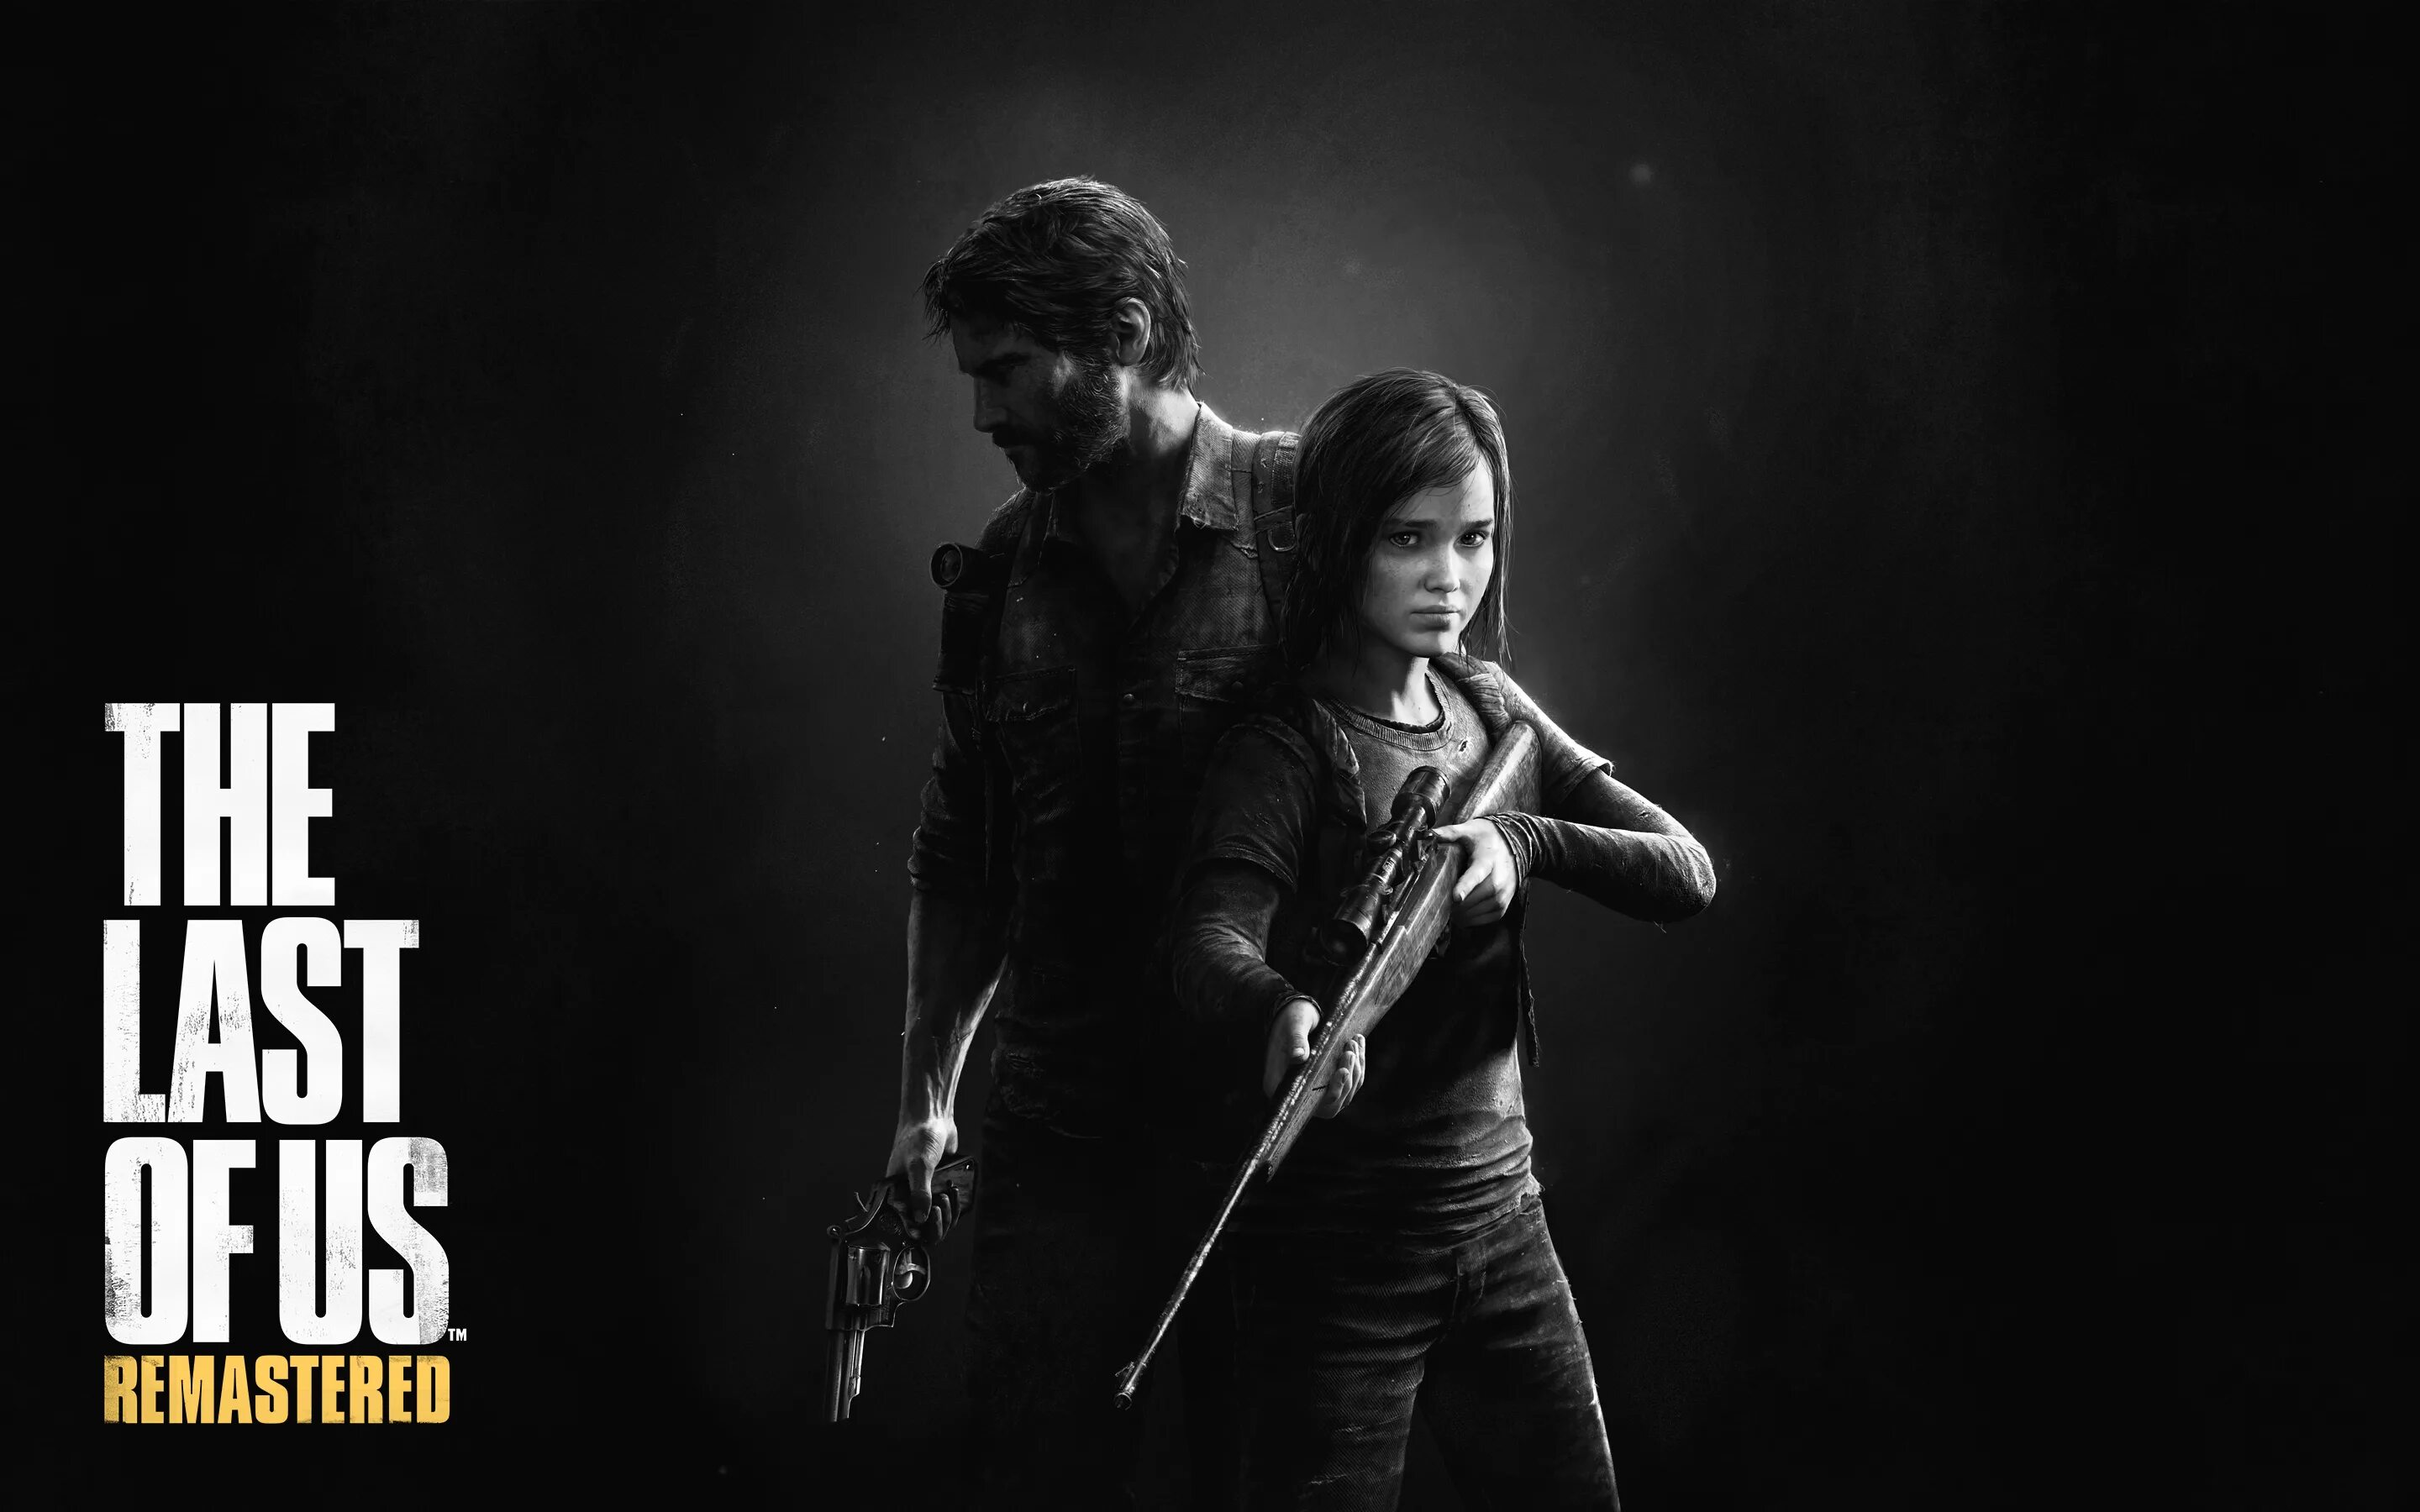 Download the last of us. The last of us. Джоэл the last of us. Джоэл the last of us 1.